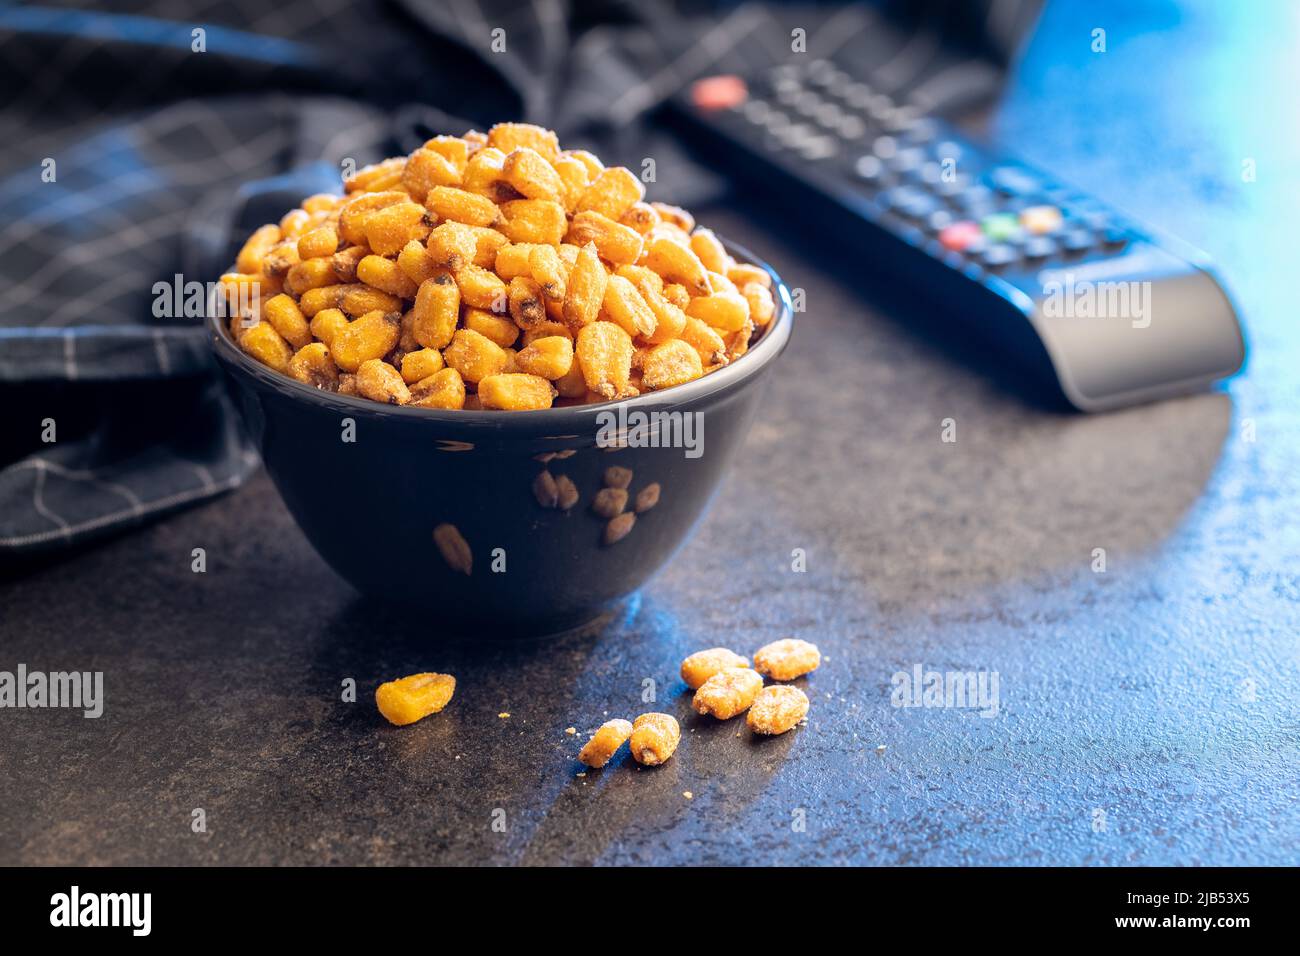 Roasted salted corn snack in bowl on a black table. Stock Photo